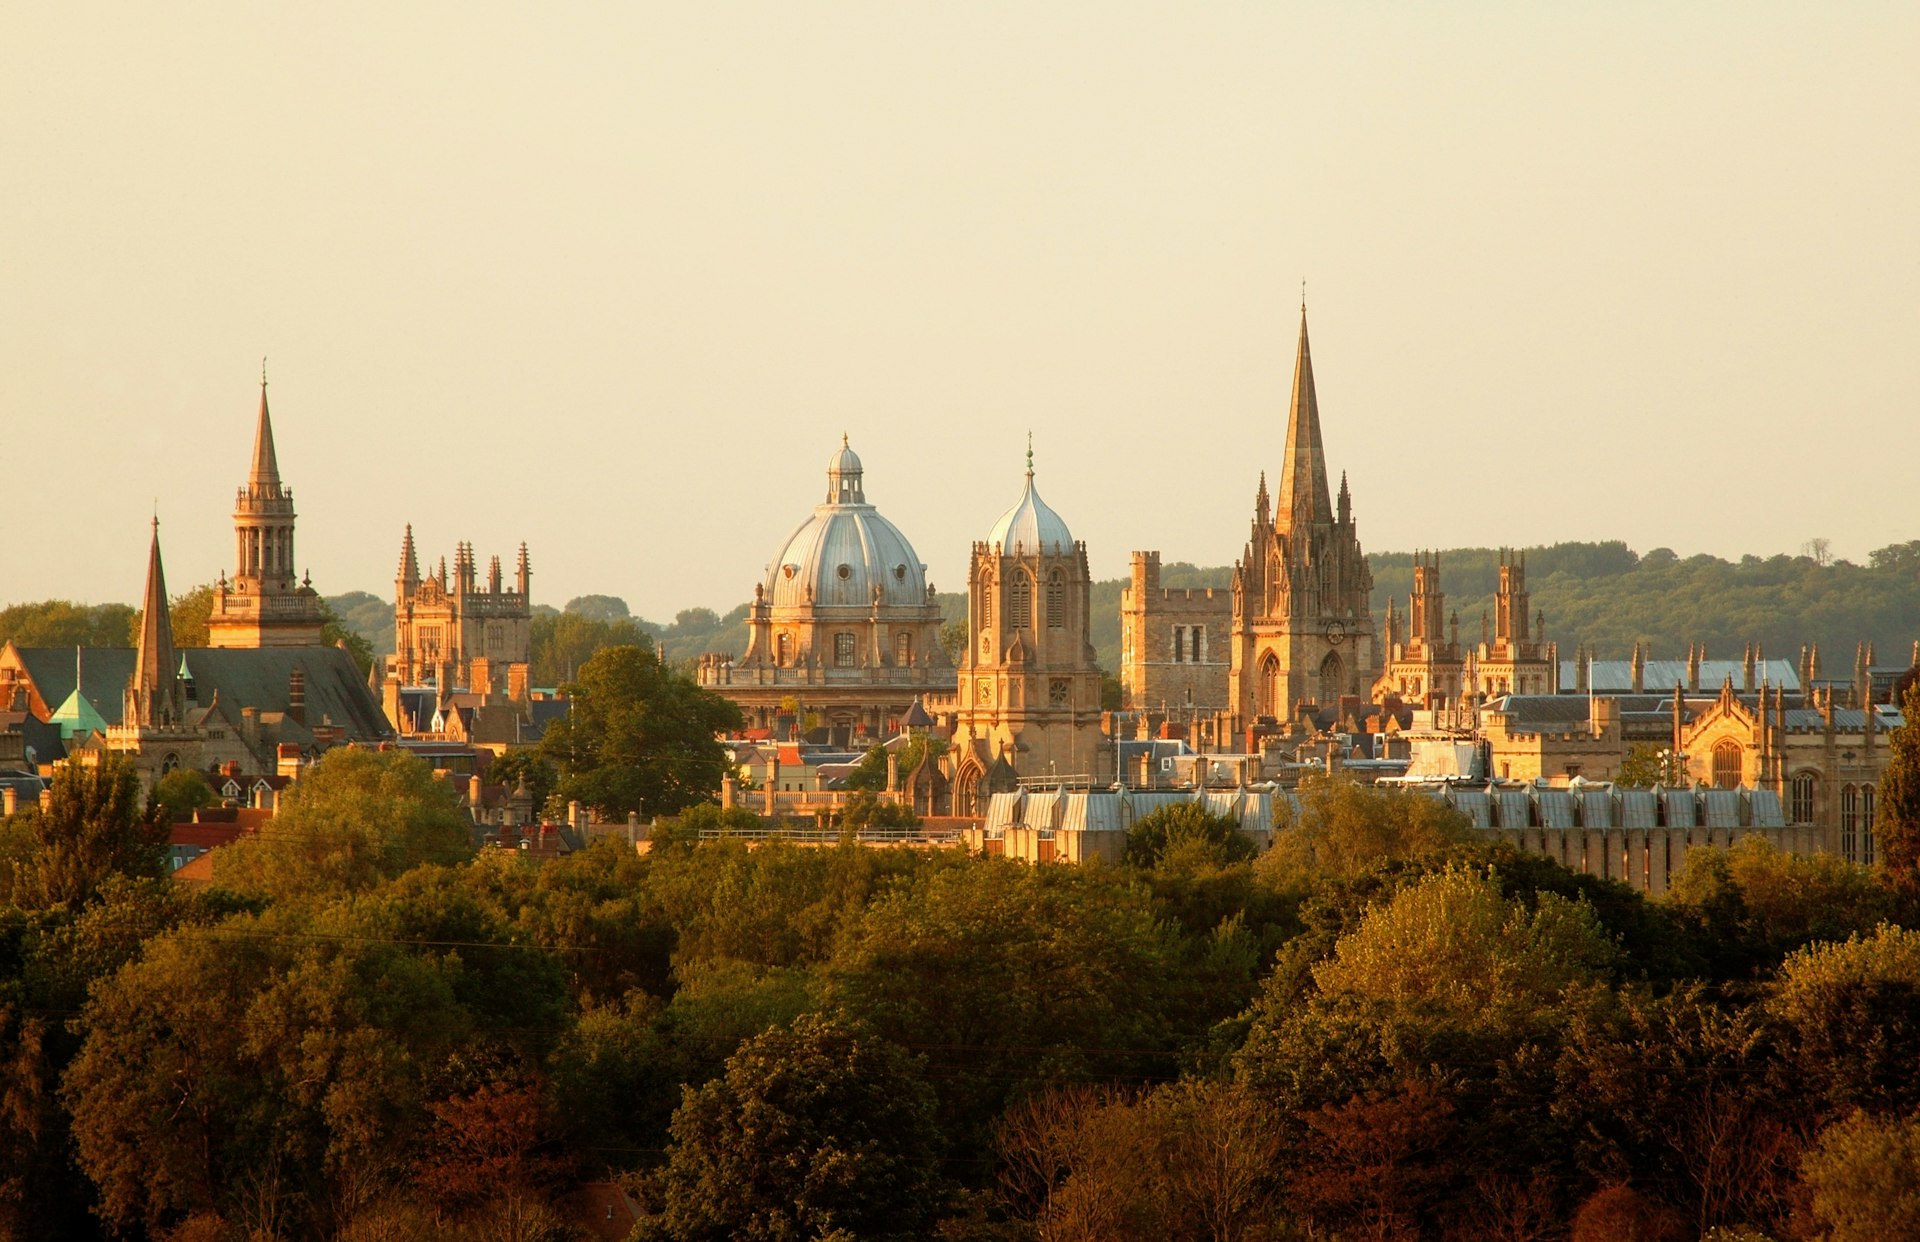 The spires and domes of Oxford's skyline at dusk